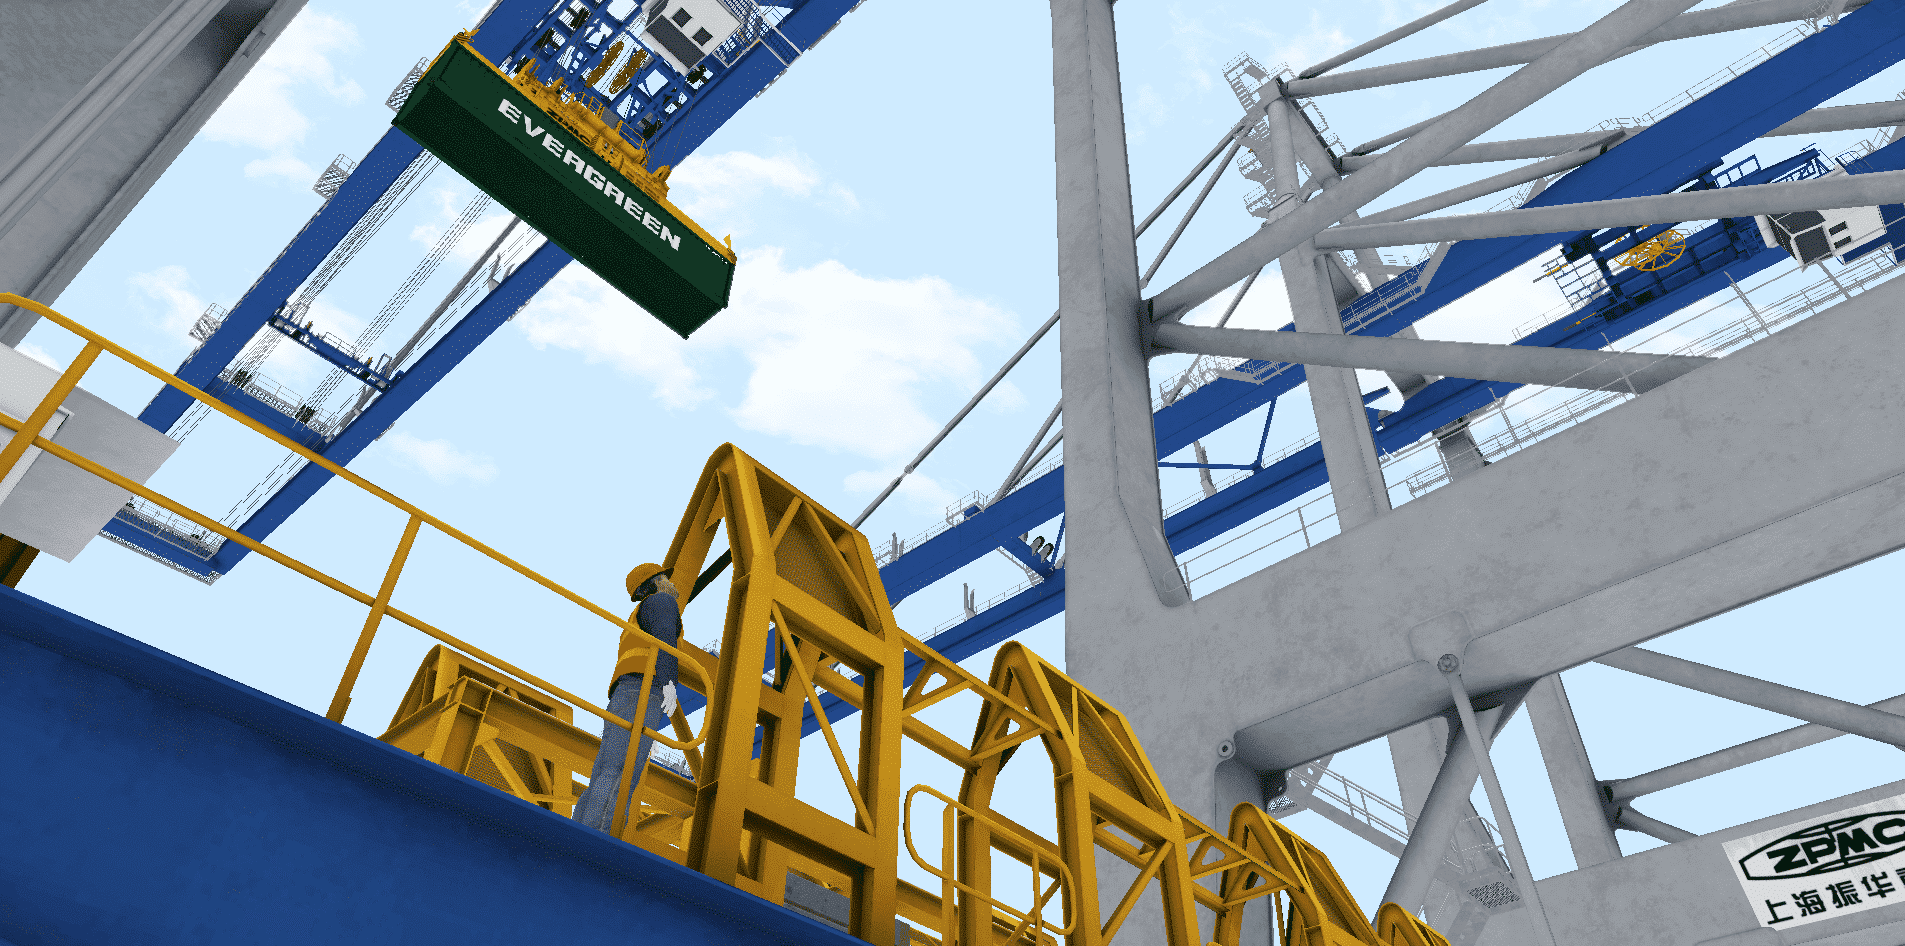 Megamax Ship-to-Shore Crane Simulator Training Pack – Close-Up view from the ground with operator